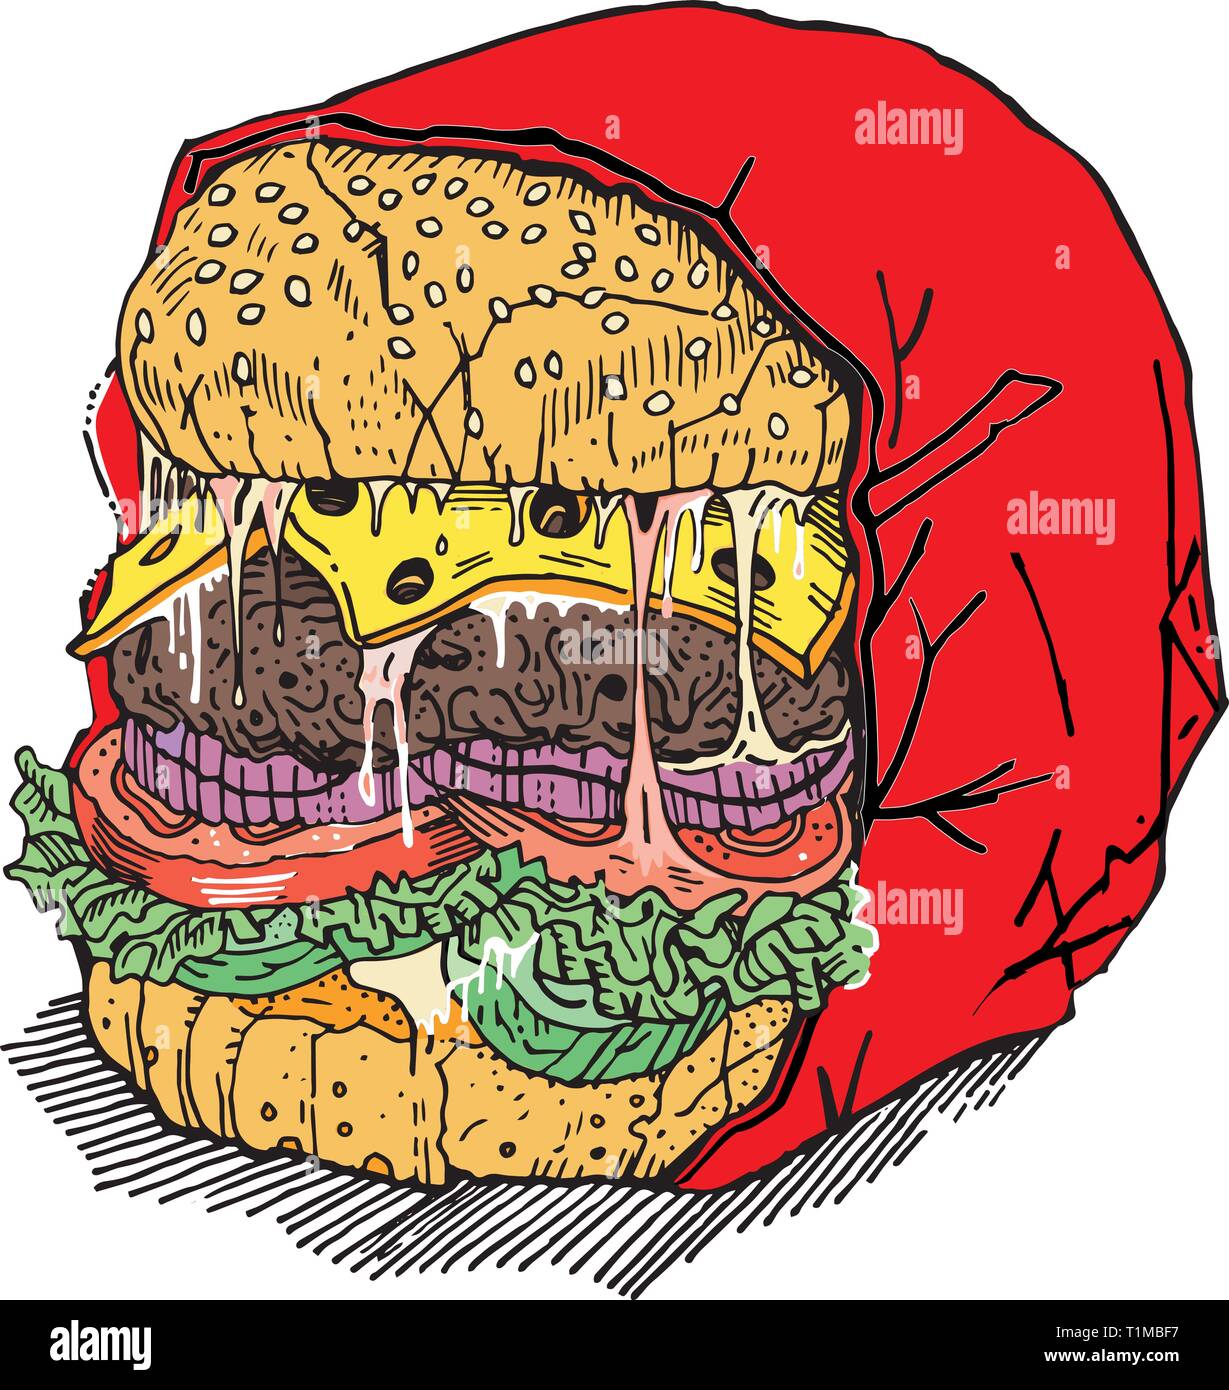 Monster burger. Meat cutlet, cheese, tomatoes, cucumbers, onions, salad, sauce on a sesame bun in a wrap. Angry brutal hamburger. Hand drawn sketchy s Stock Vector